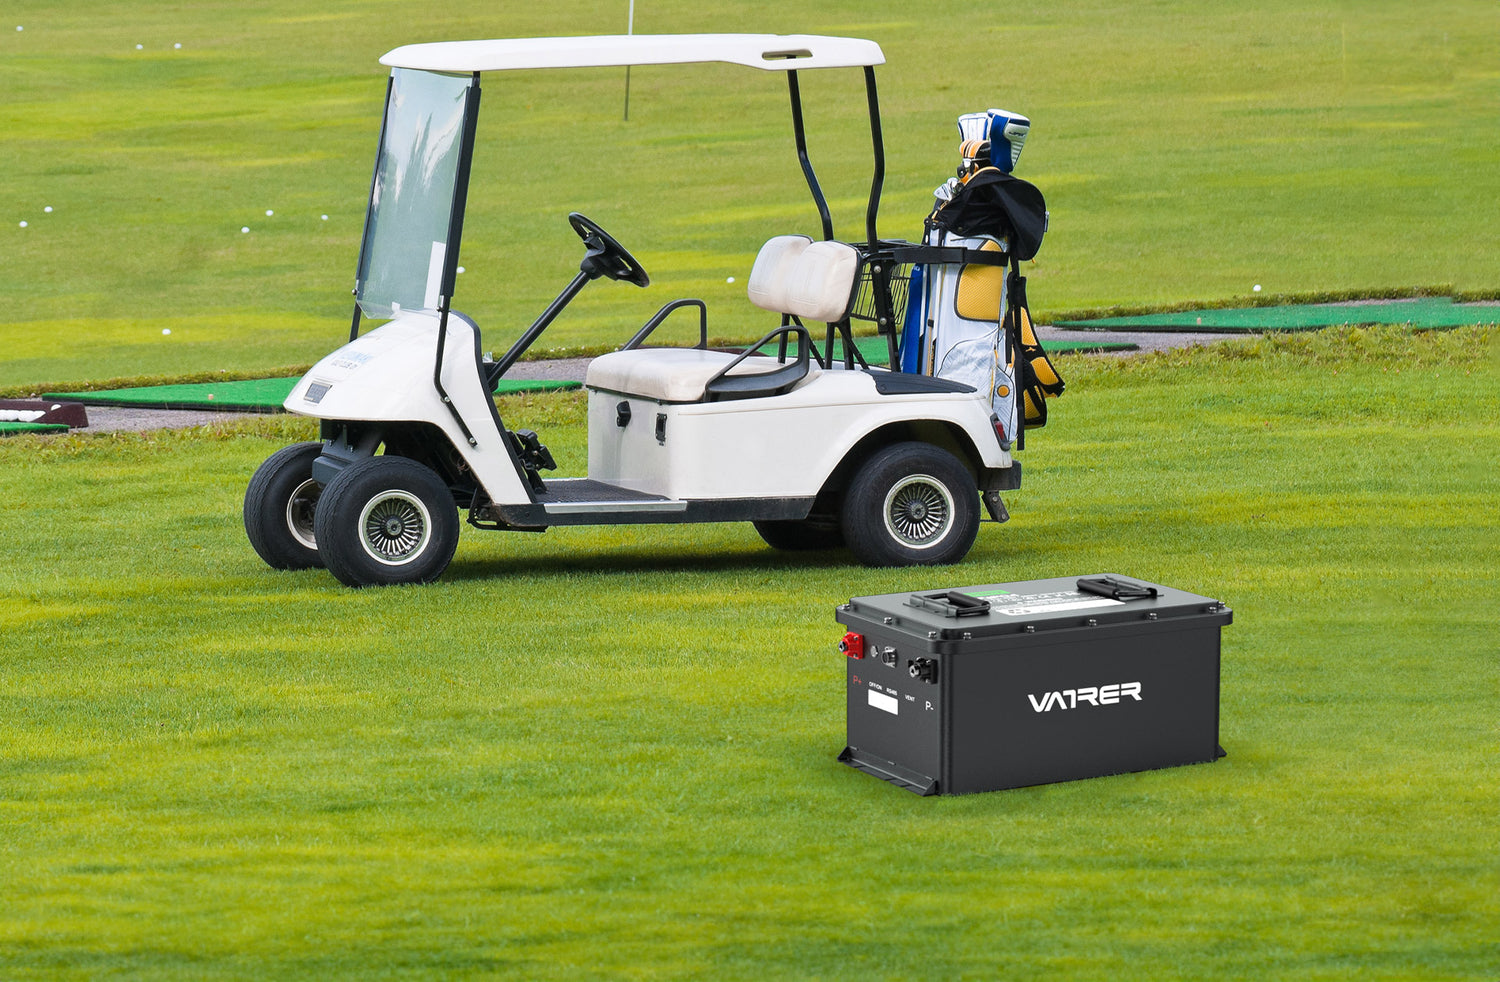 Some FAQs about Vatrer Golf Cart Batteries. What's your Questions?